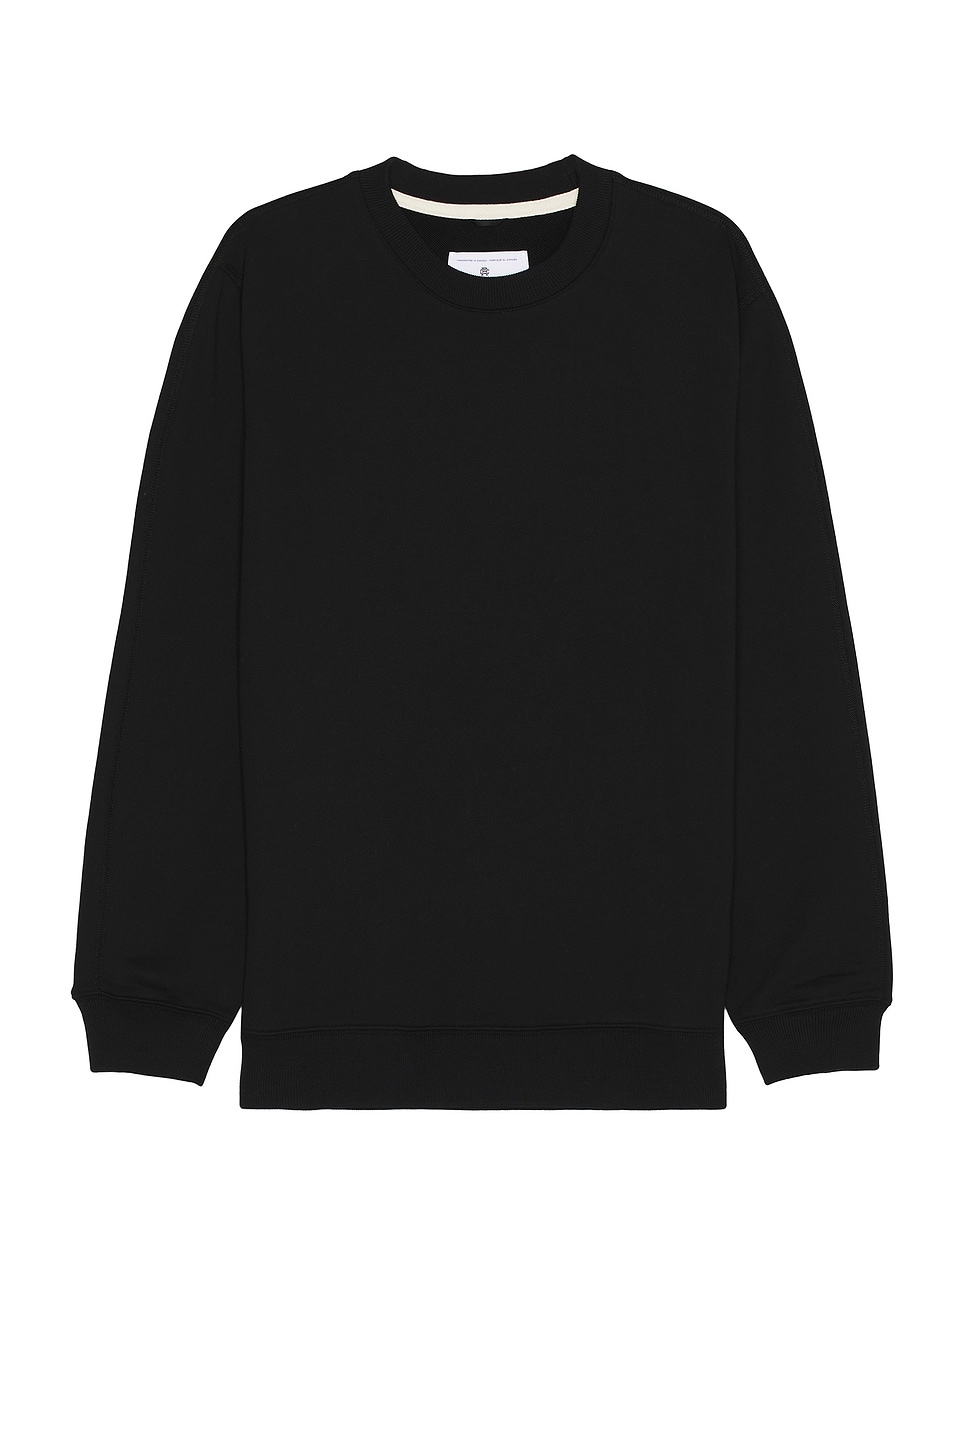 Image 1 of Reigning Champ Midweight Terry Classic Crewneck in Black